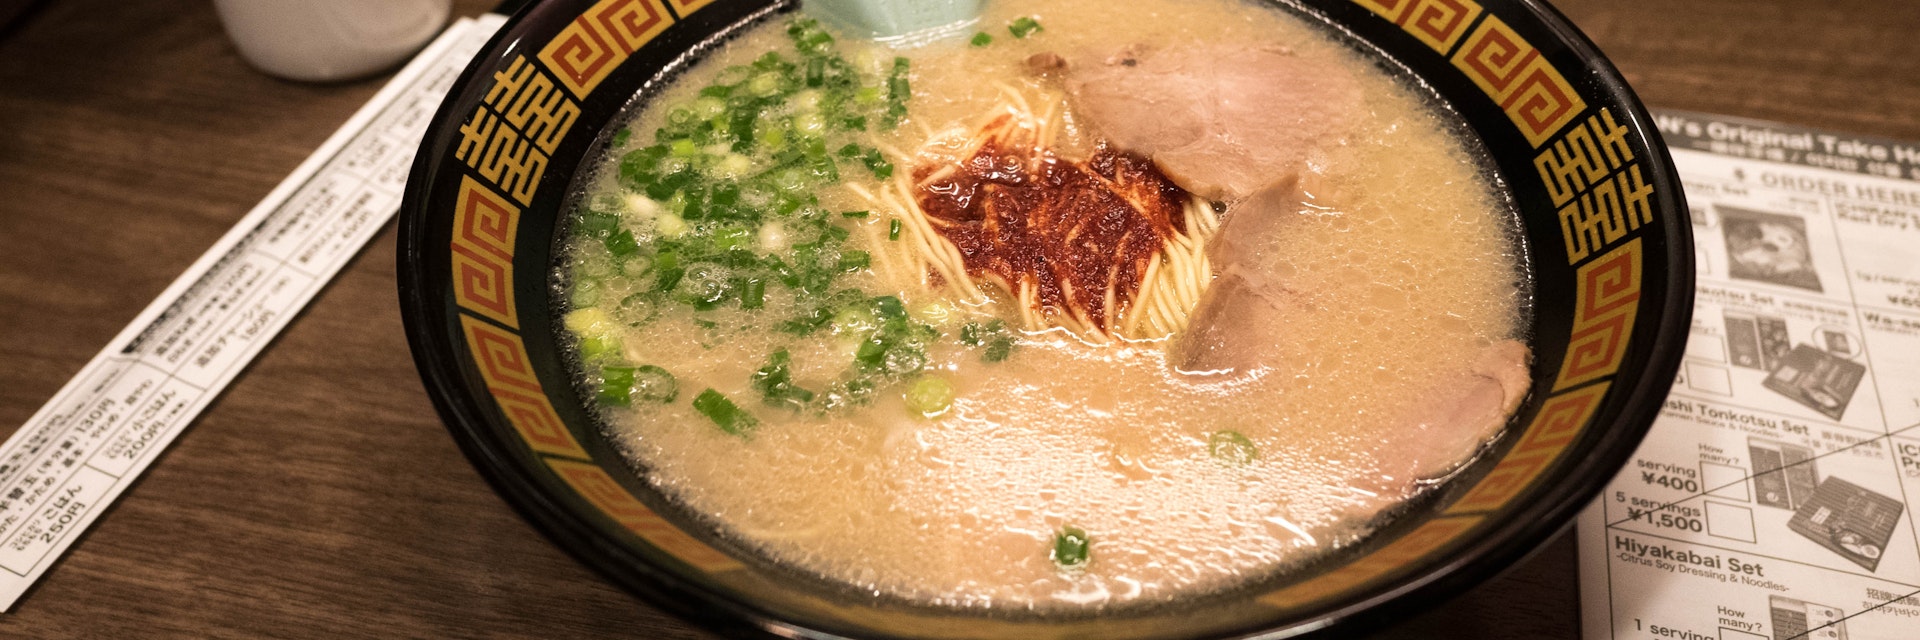 Fukuoka, Japan - Jan 20, 2017 : Ichiran Ramen chain in Fukuoka at Hakata railway station. Ichiran Tonkotsu Ramen is found in Fukuoka Prefecture in 1960.; Shutterstock ID 584799376; Your name (First / Last): Laura Crawford; GL account no.: 65050; Netsuite department name: Online Editorial; Full Product or Project name including edition: POI images for lp.com